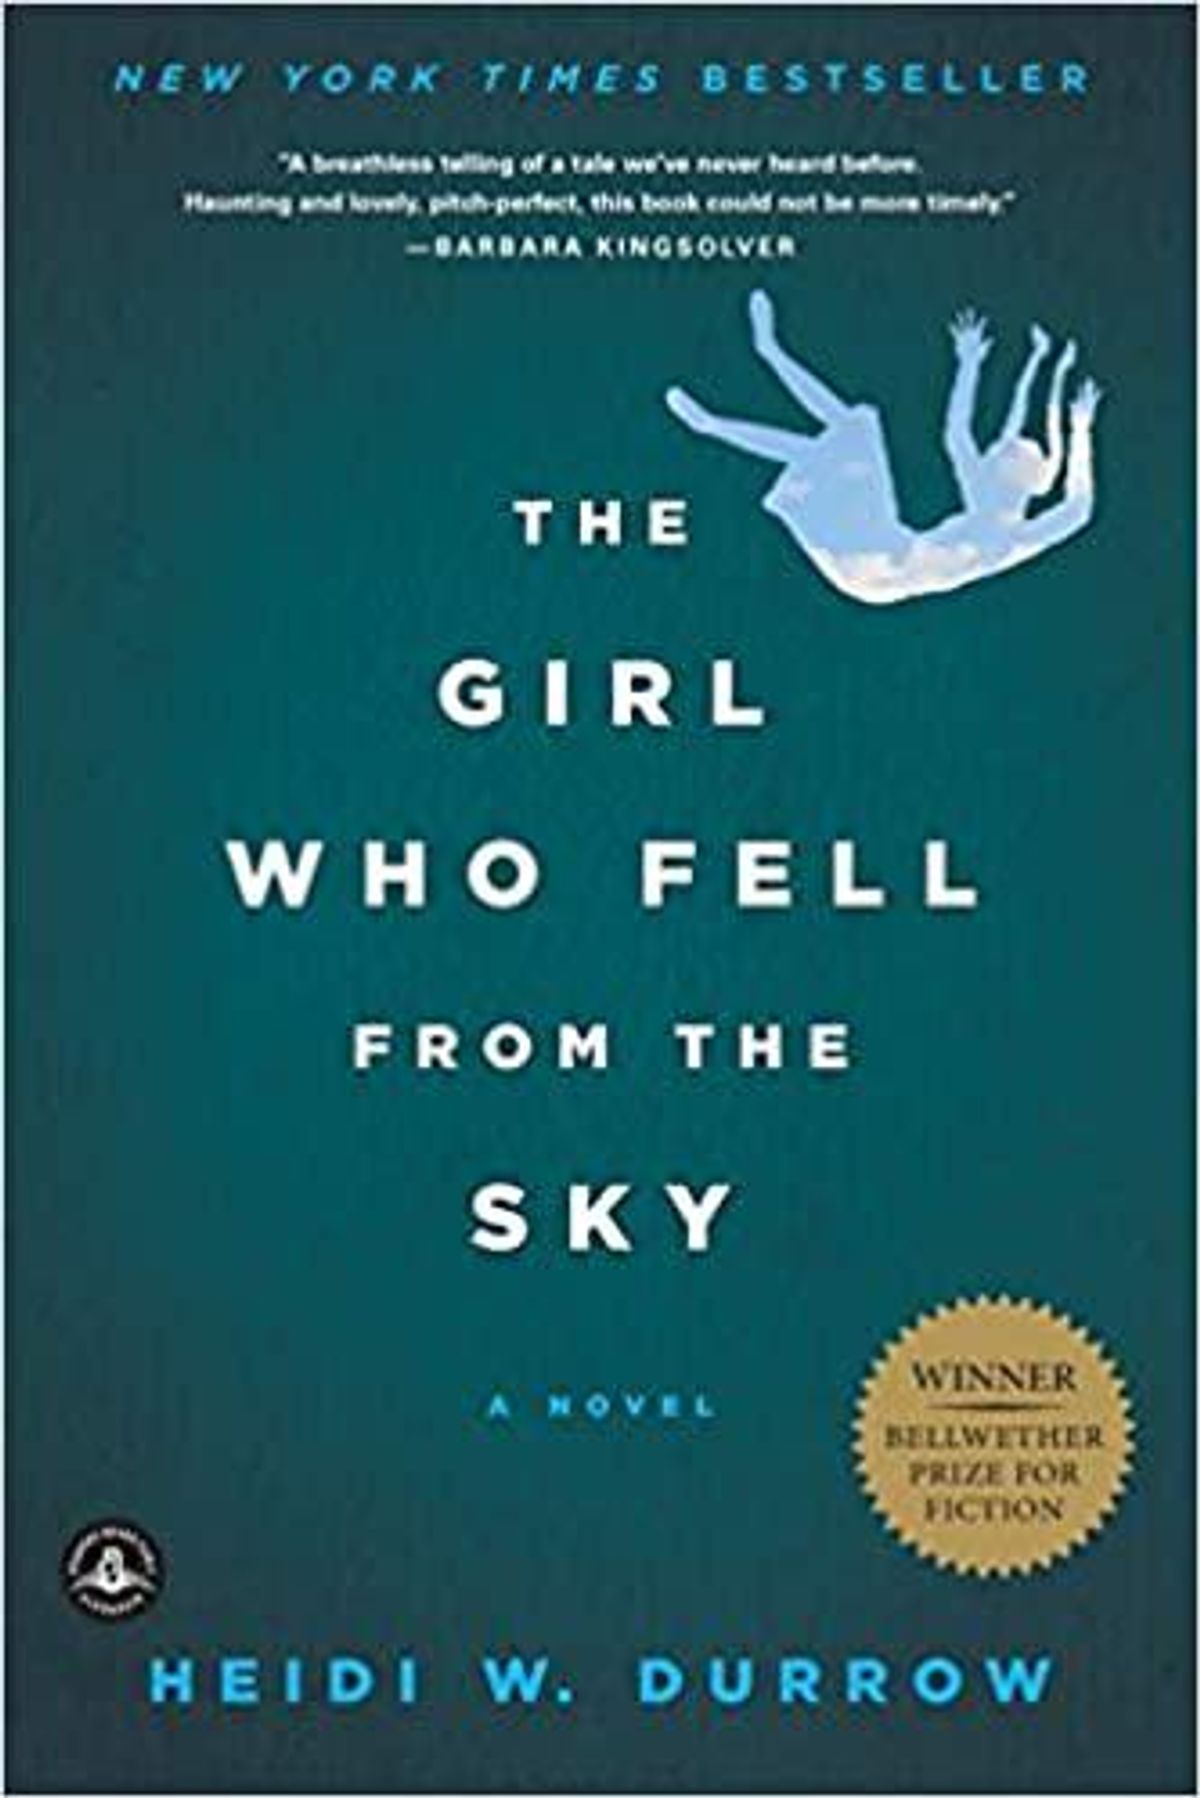 The Girl Who Fell From the Sky by Heidi W Durrow